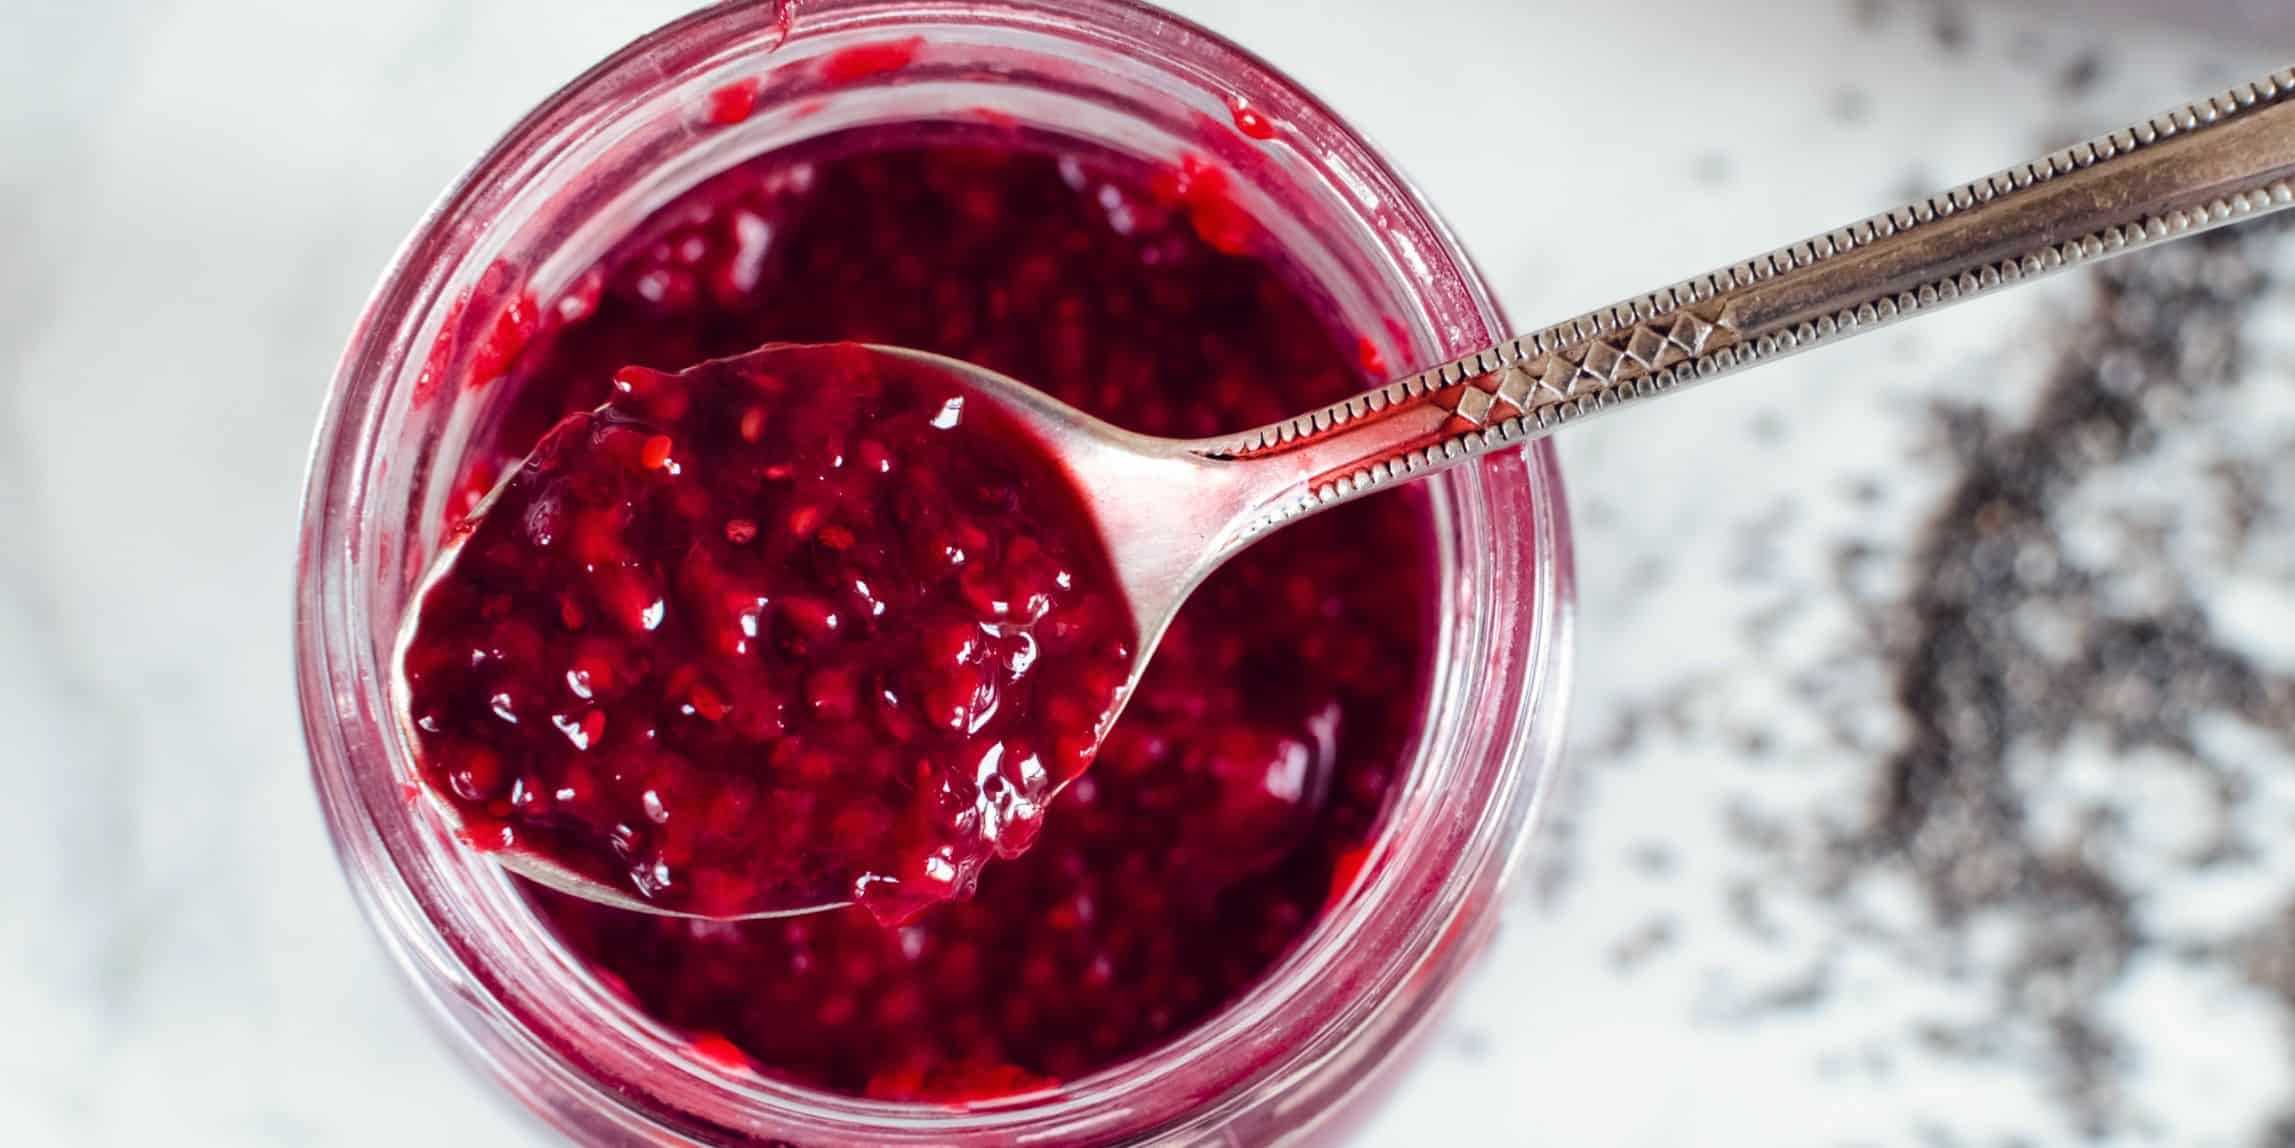 pomegranate jam in a jar with a spoon